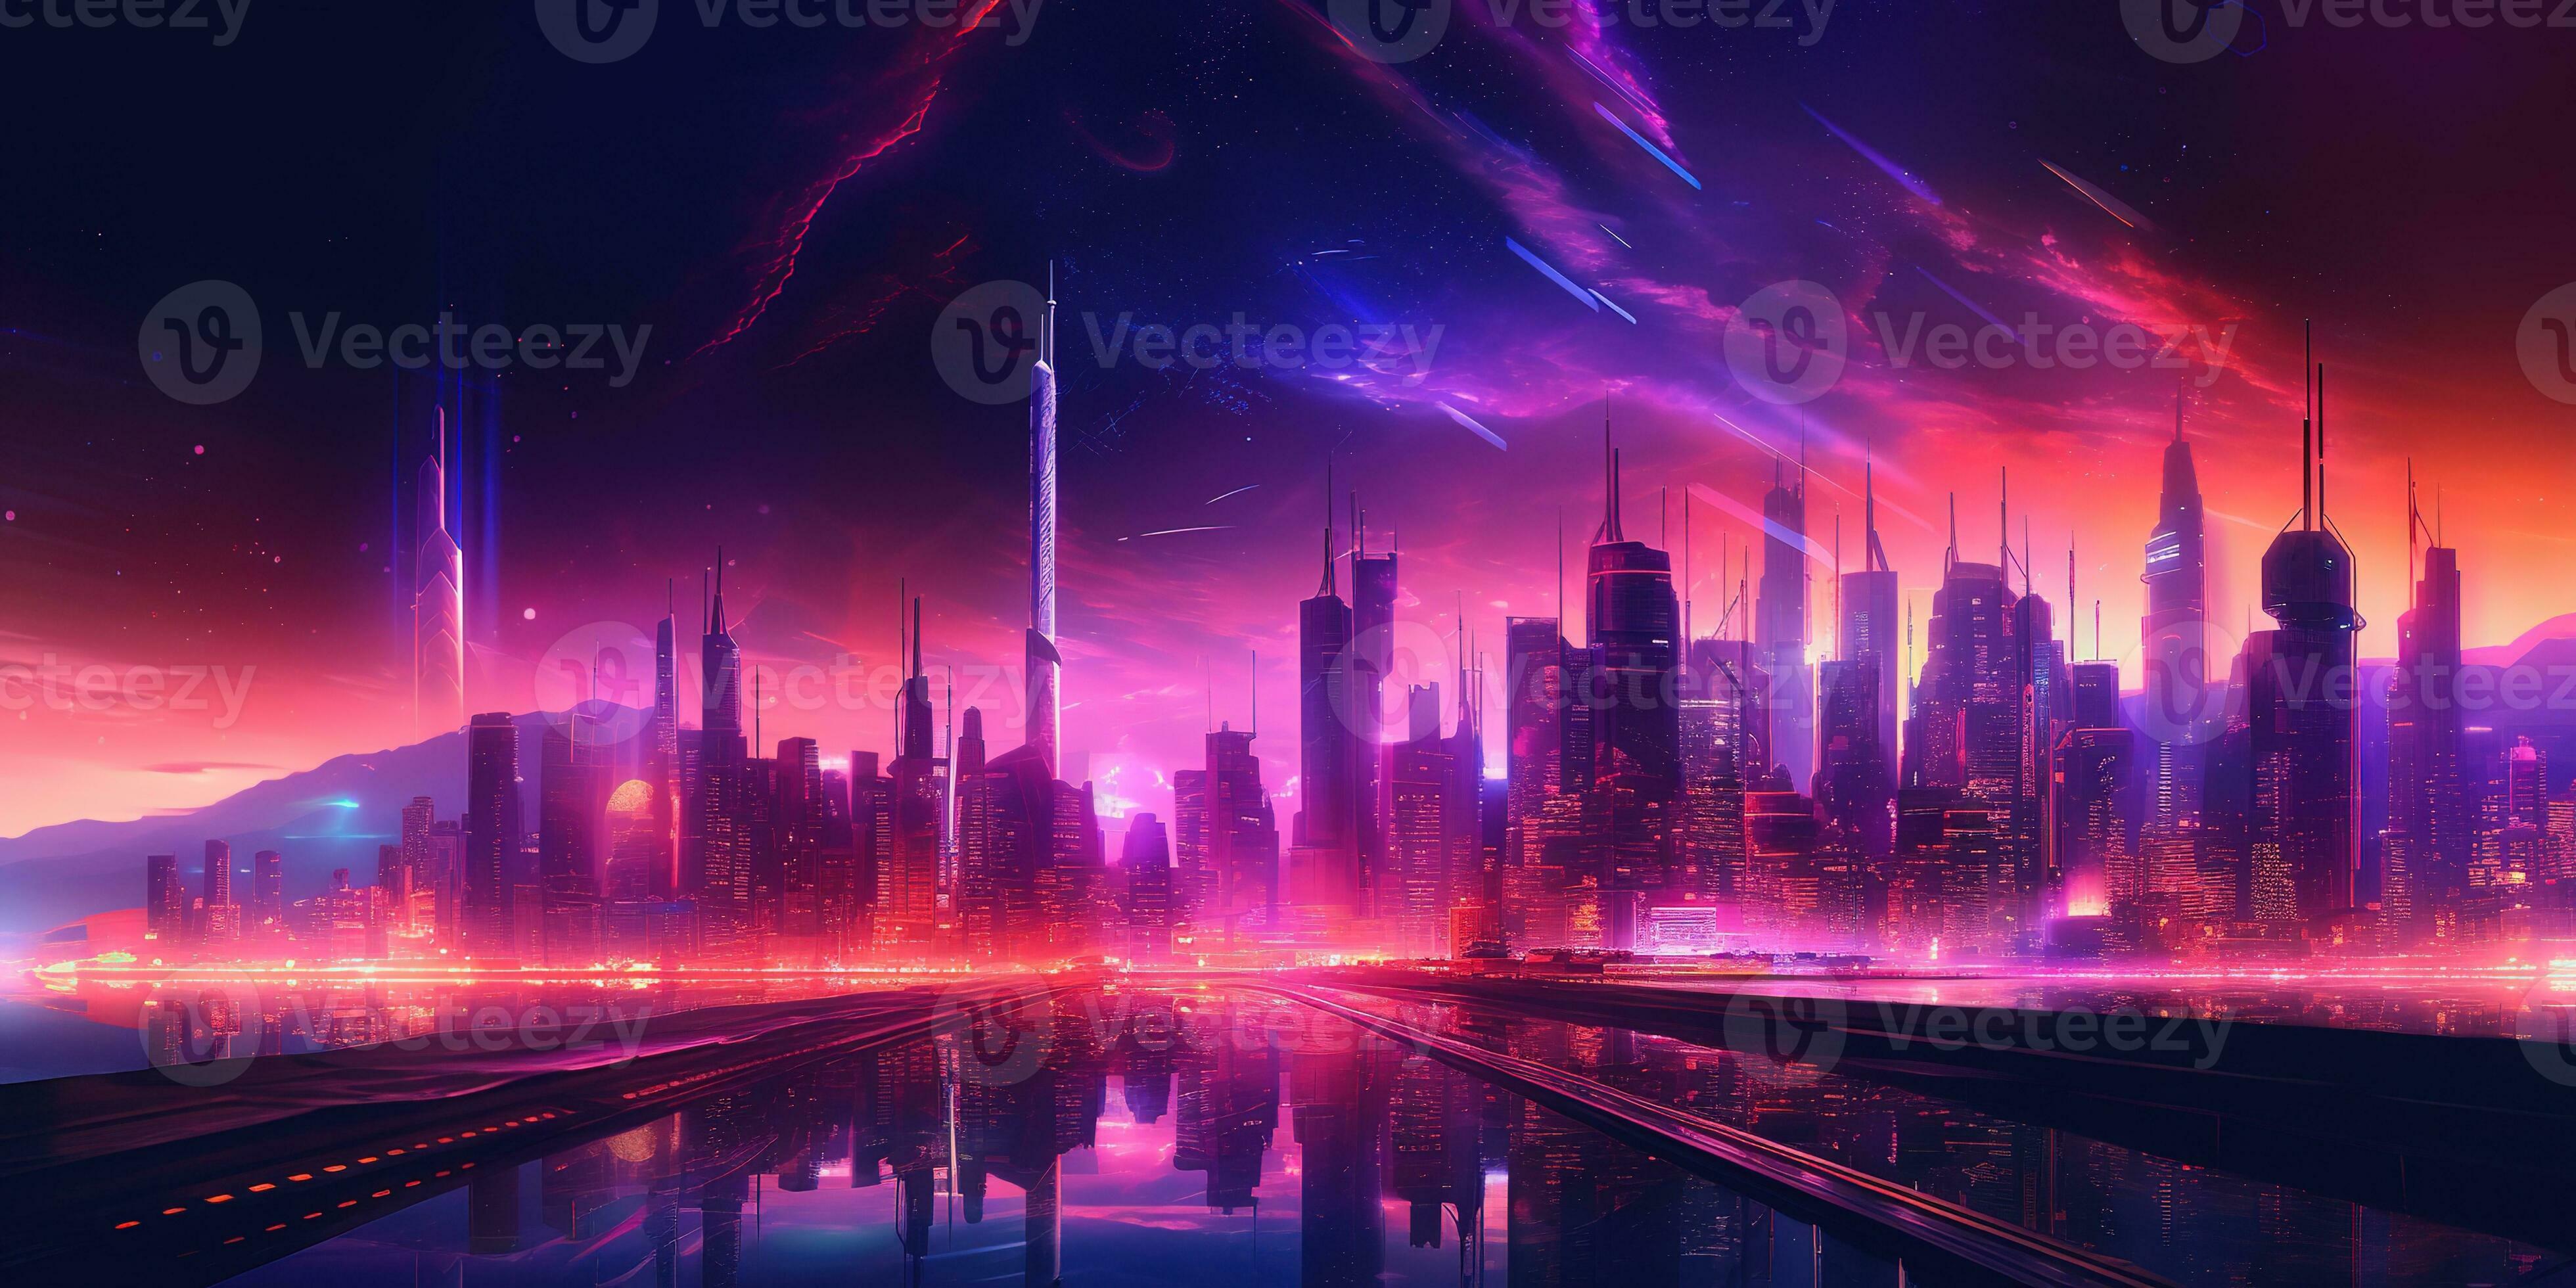 Aesthetic city synthwave wallpaper with a cool and vibrant neon design